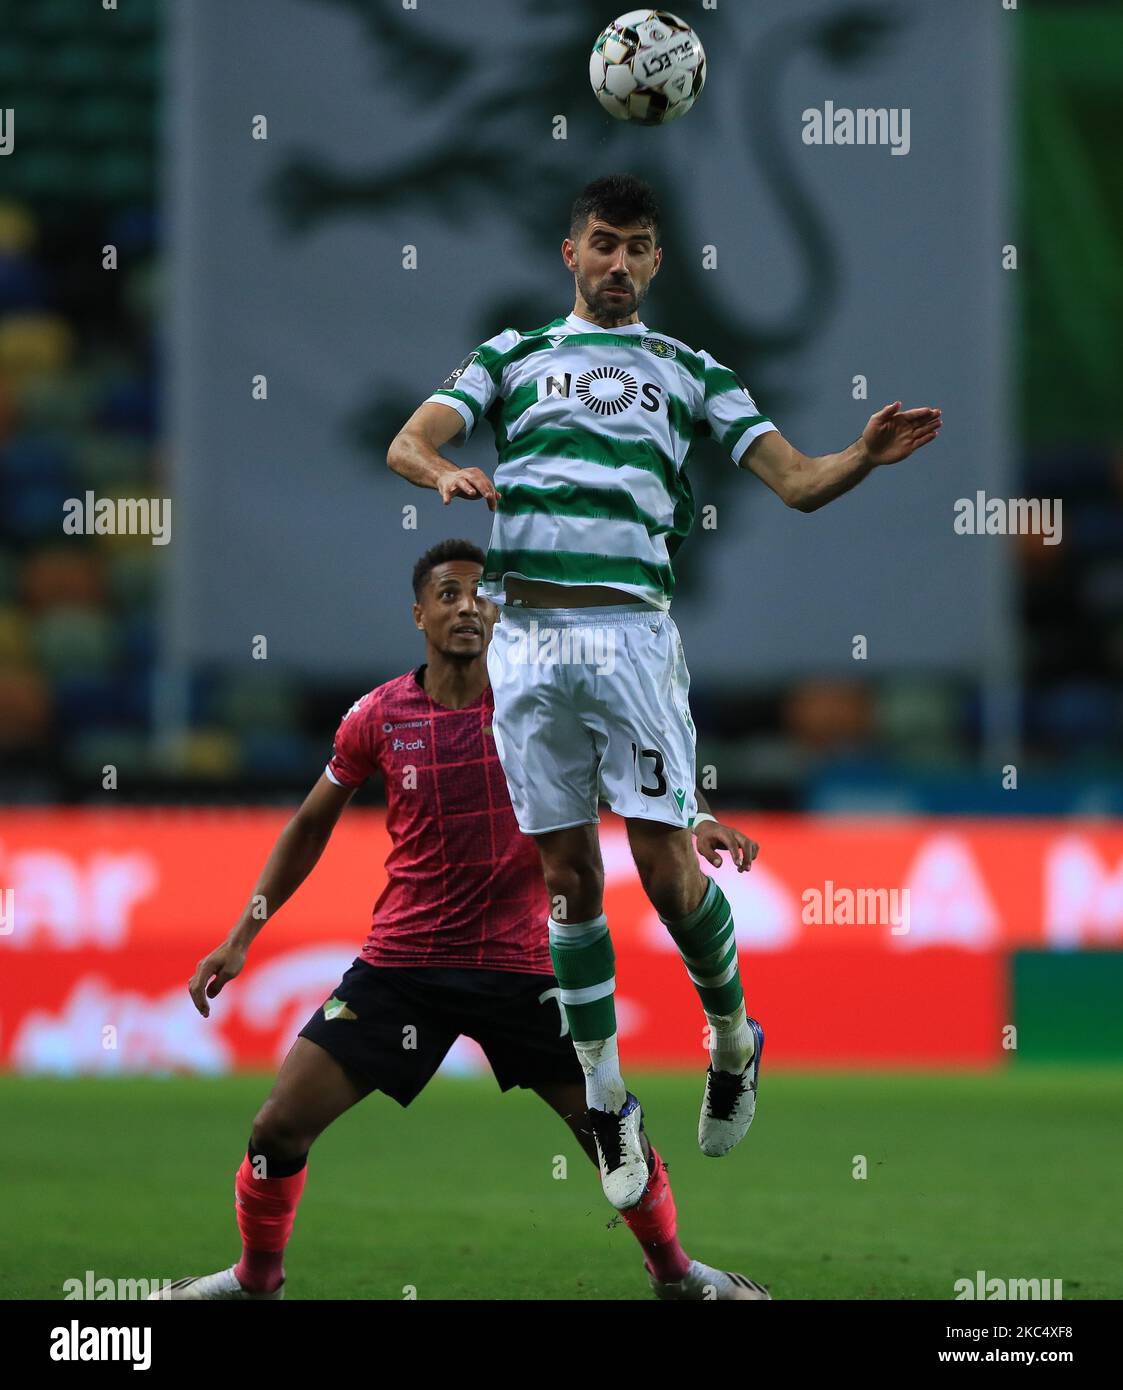 Luis Neto of Sporting CP in action during the Liga NOS match between Sporting CP and Moreirense FC at Estadio Jose Alvalade on November 28, 2020 in Lisbon, Portugal. (Photo by Paulo Nascimento/NurPhoto) Stock Photo